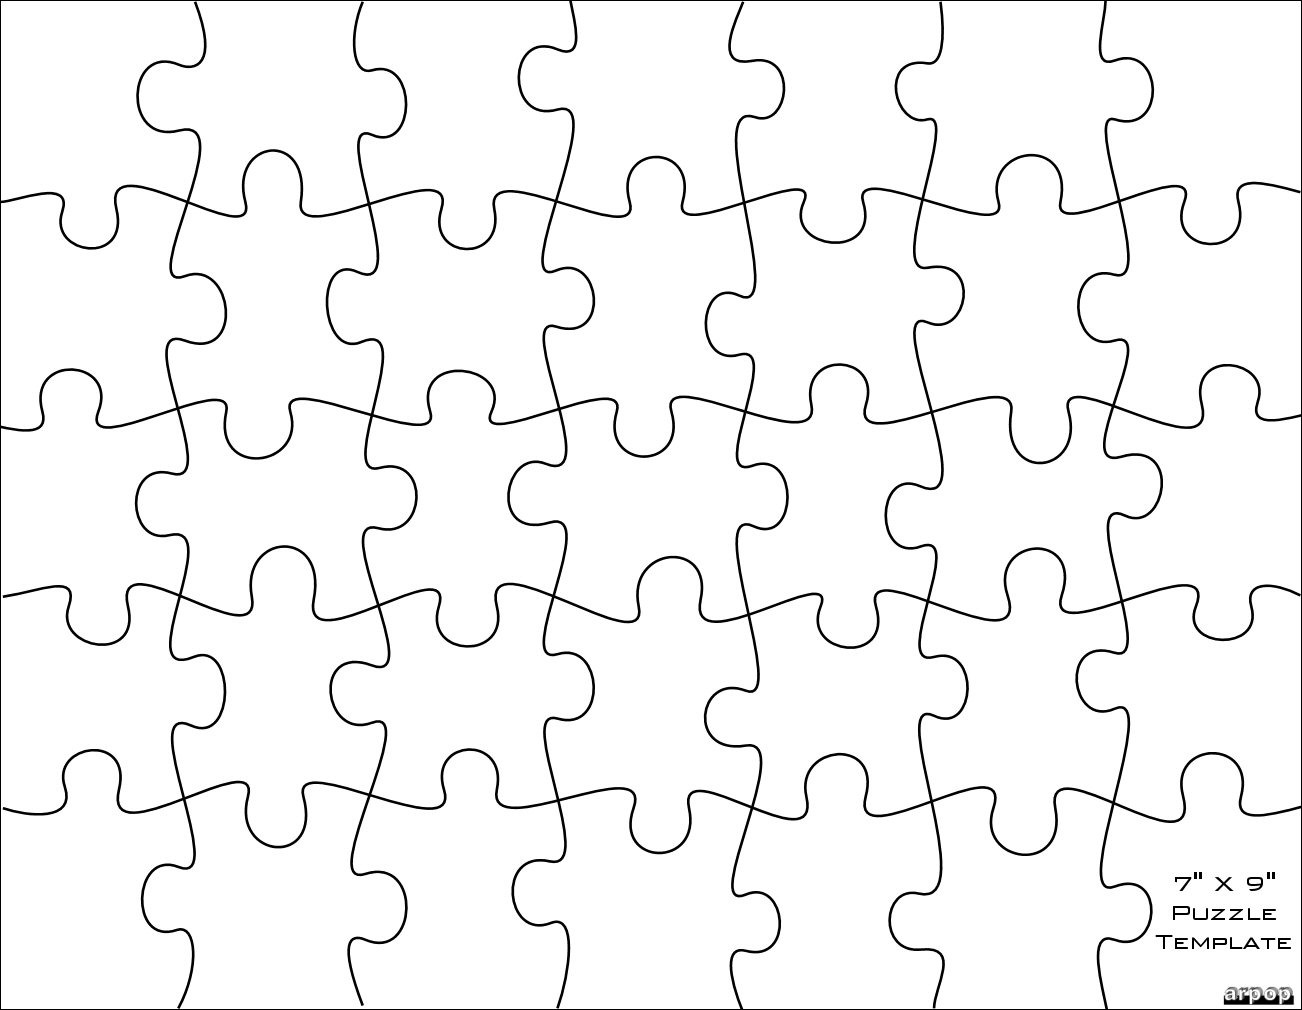 Free Pattern for Making Jigsaw Puzzles | eHow.com